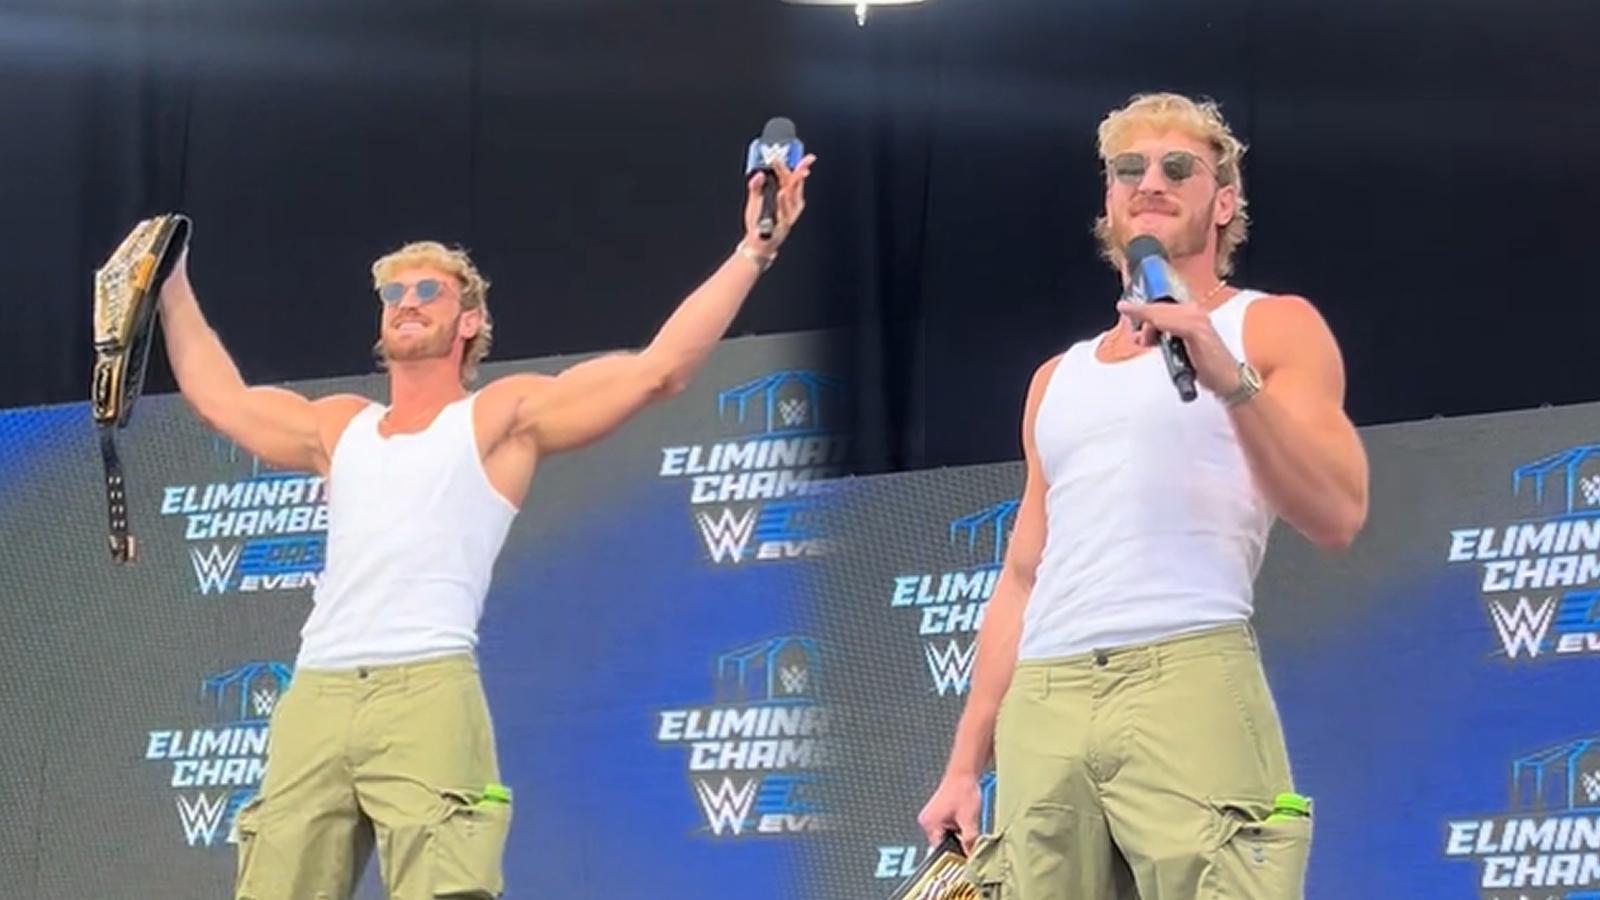 Logan Paul booed by WWE fans in Perth ahead of Elimination Chamber